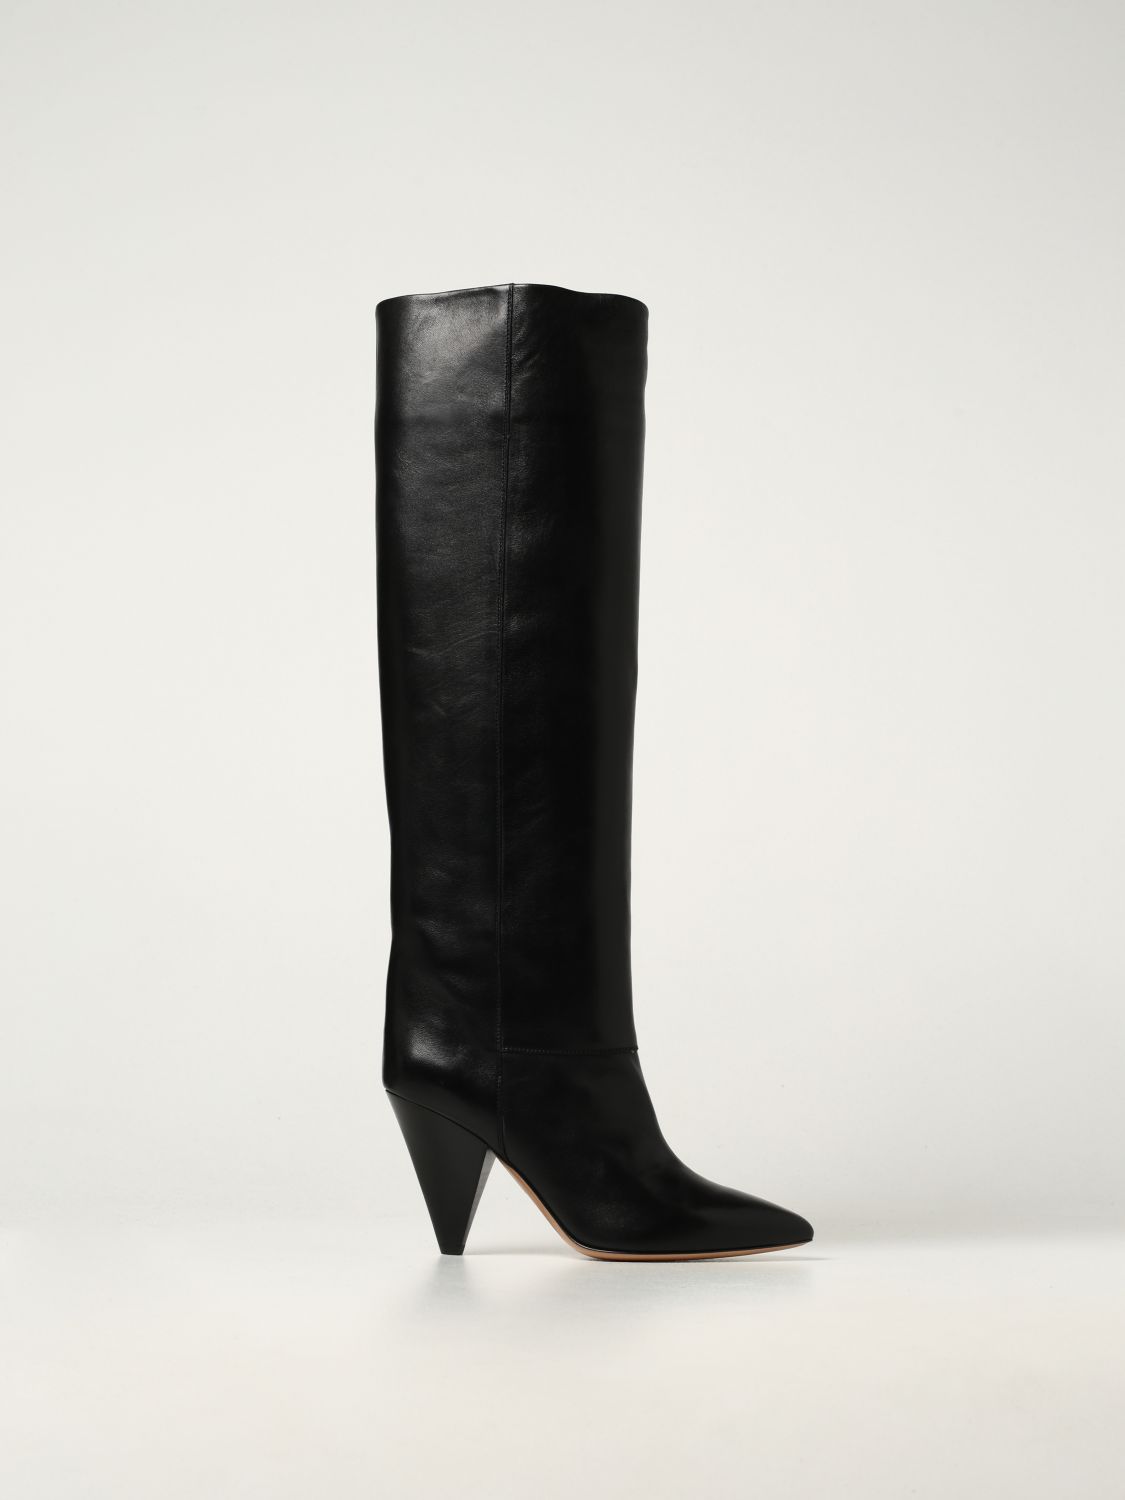 Black | Isabel Marant boots BT022421A043S online at GIGLIO.COM